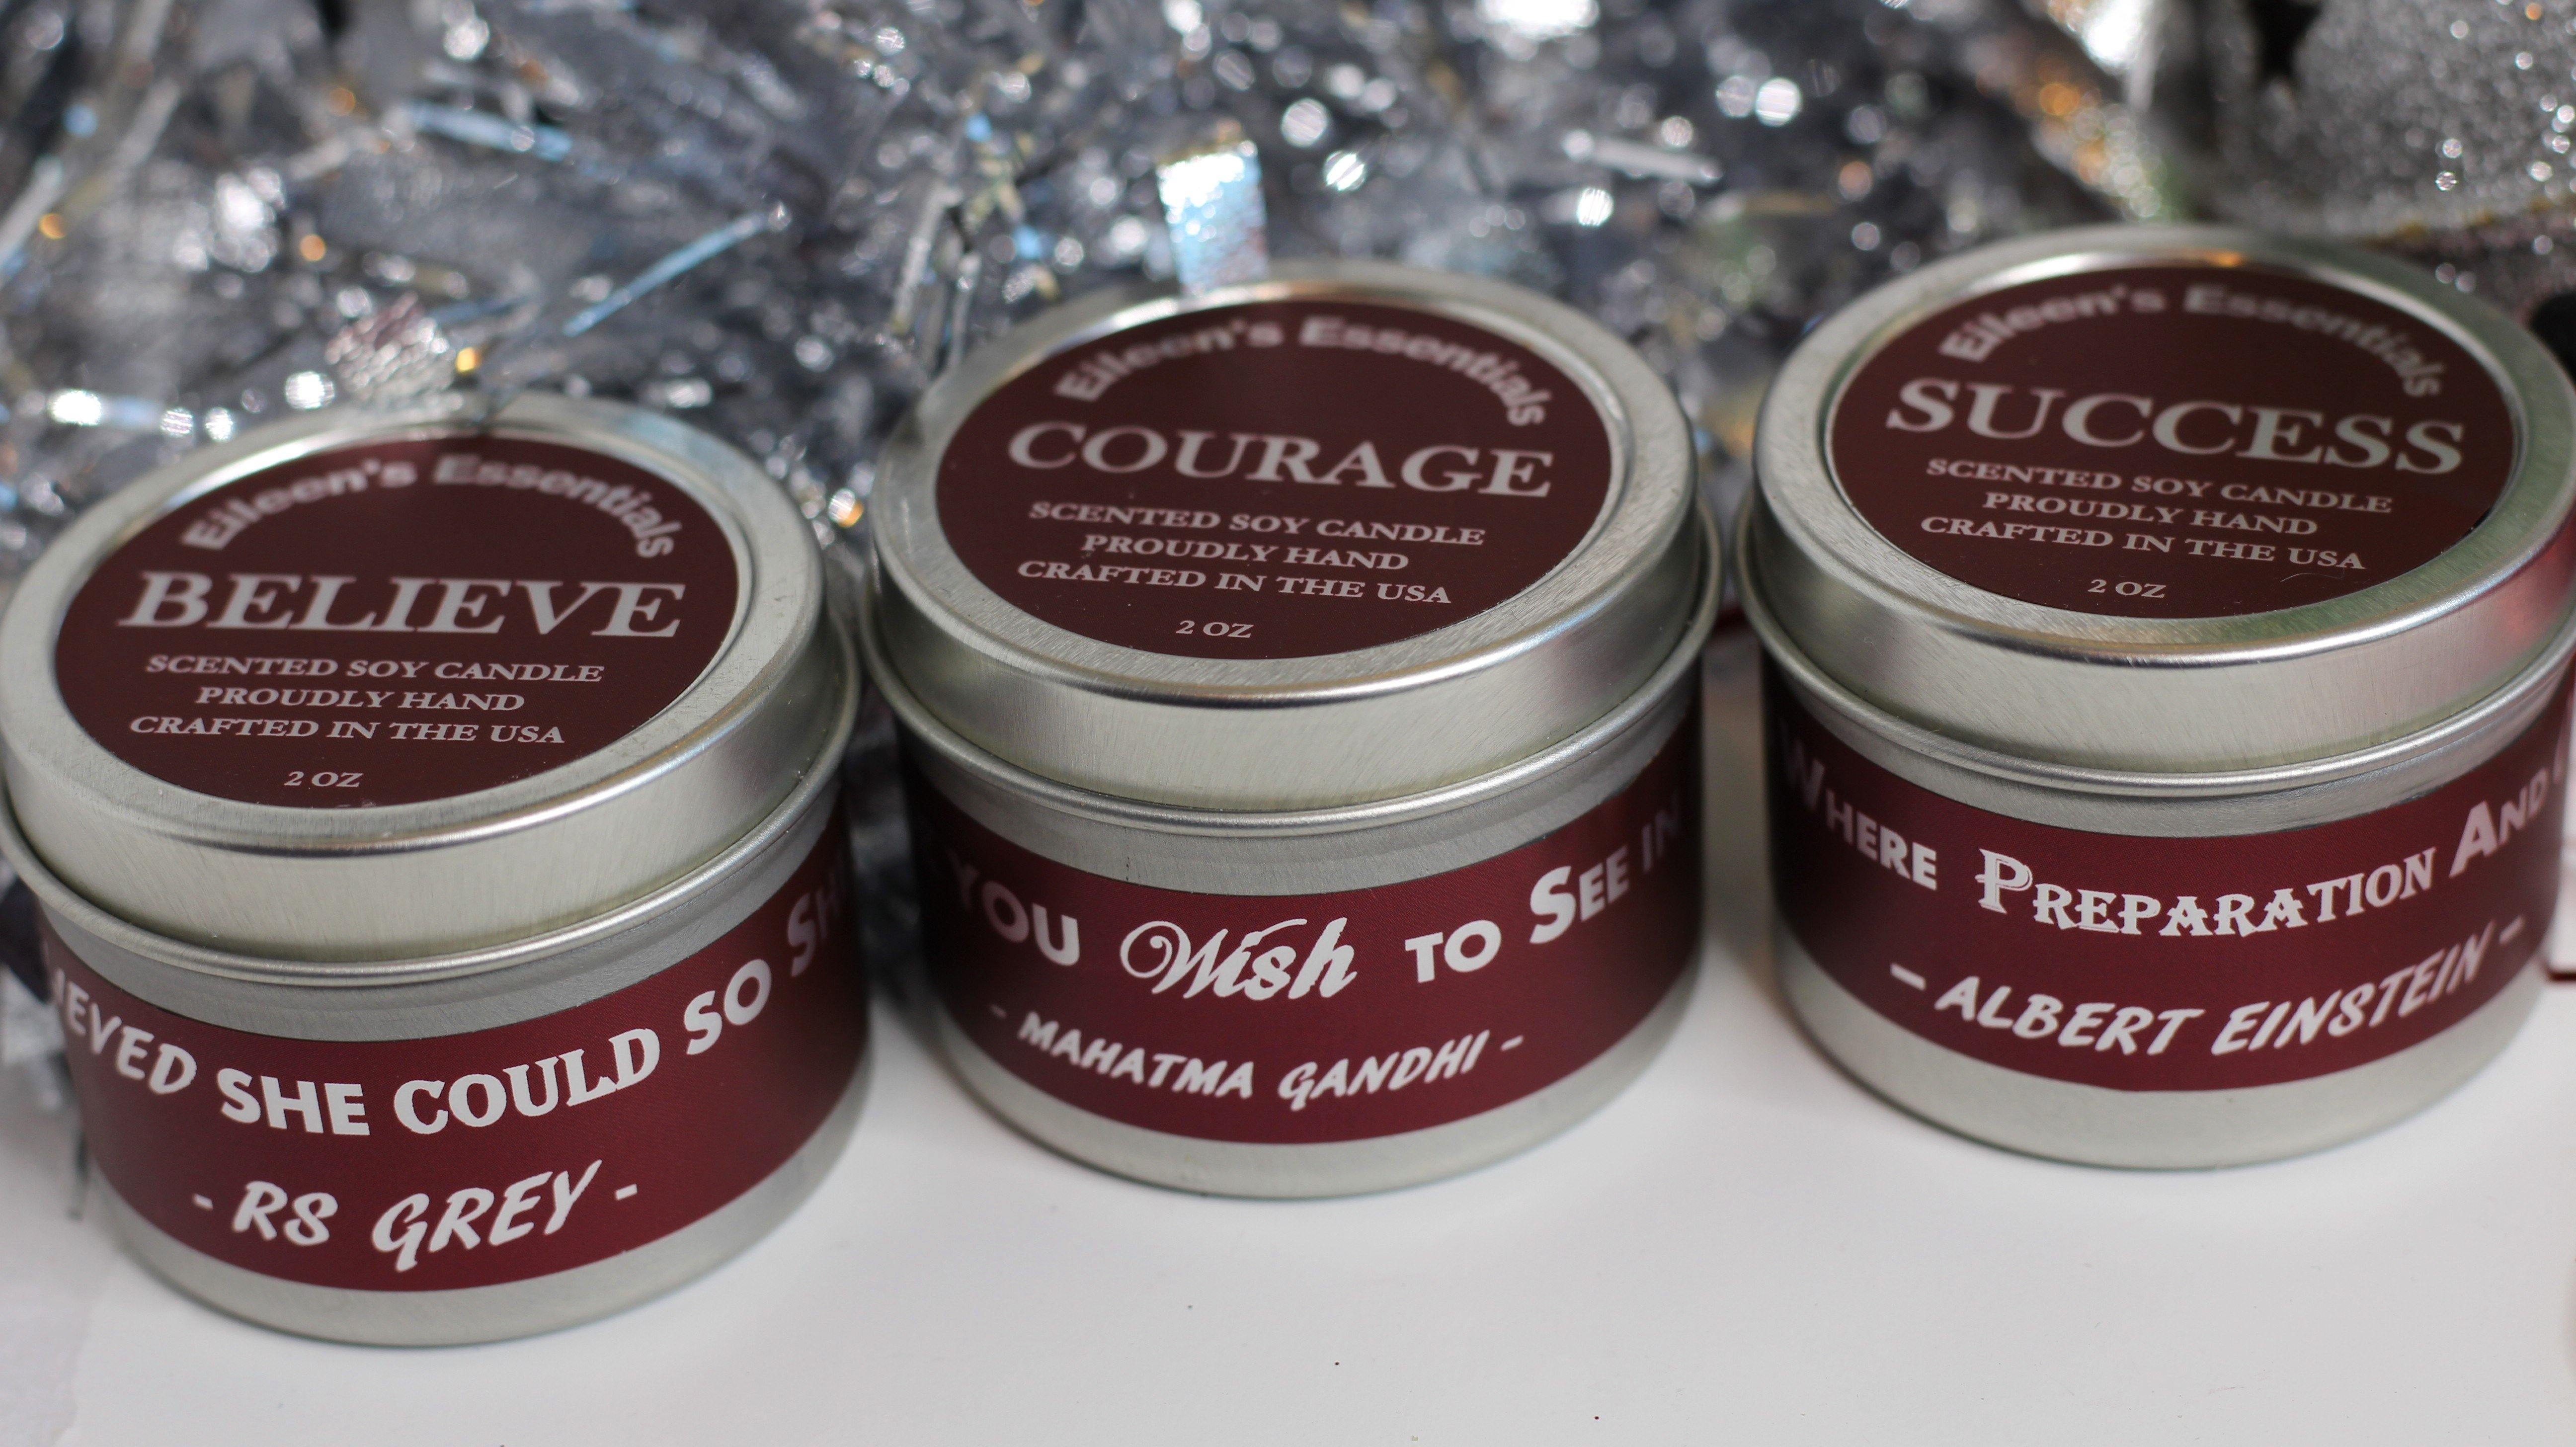 Limited-Time Holiday Deal; Three Small Inspirational Candles (2 Options) - Eileen's Essentials